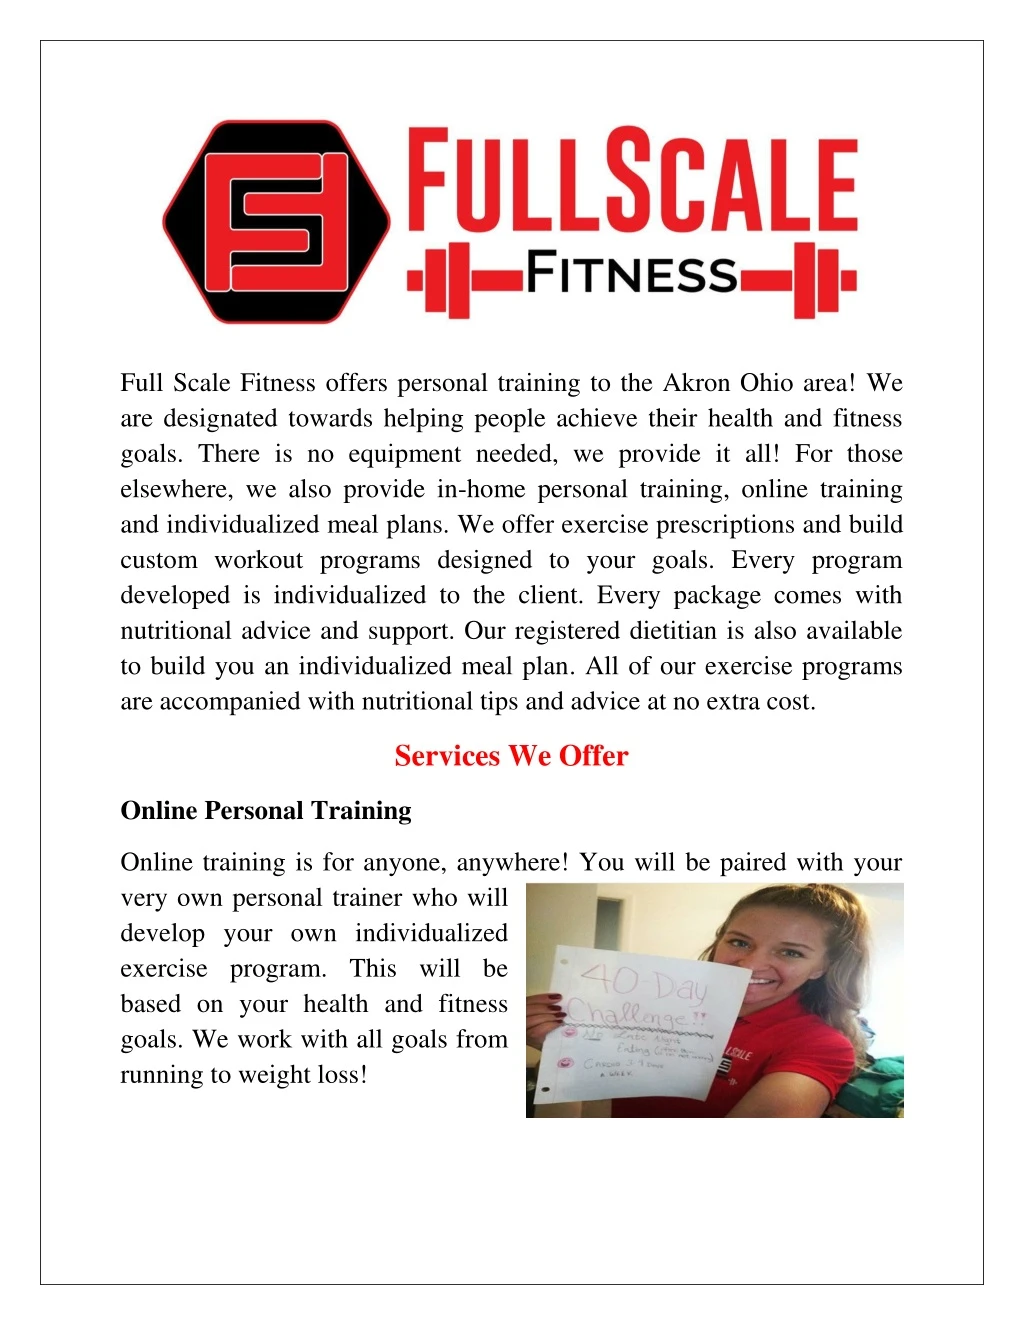 full scale fitness offers personal training